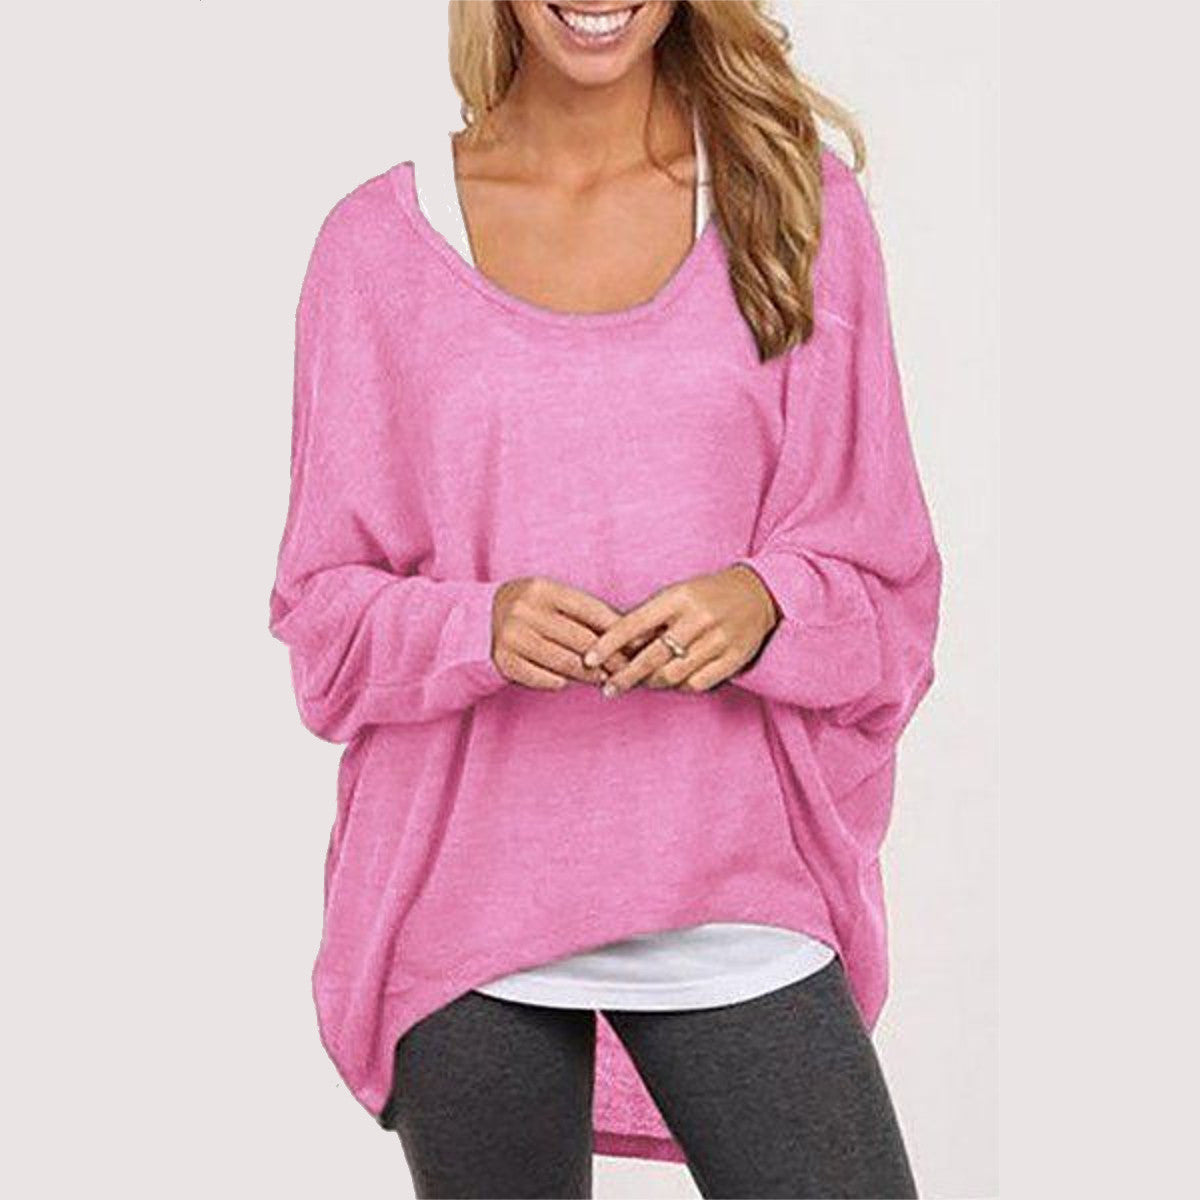 Women Sweater Jumper Pullover Batwing Long Sleeve Casual Loose Solid Blouse Shirt Top Plus - CelebritystyleFashion.com.au online clothing shop australia